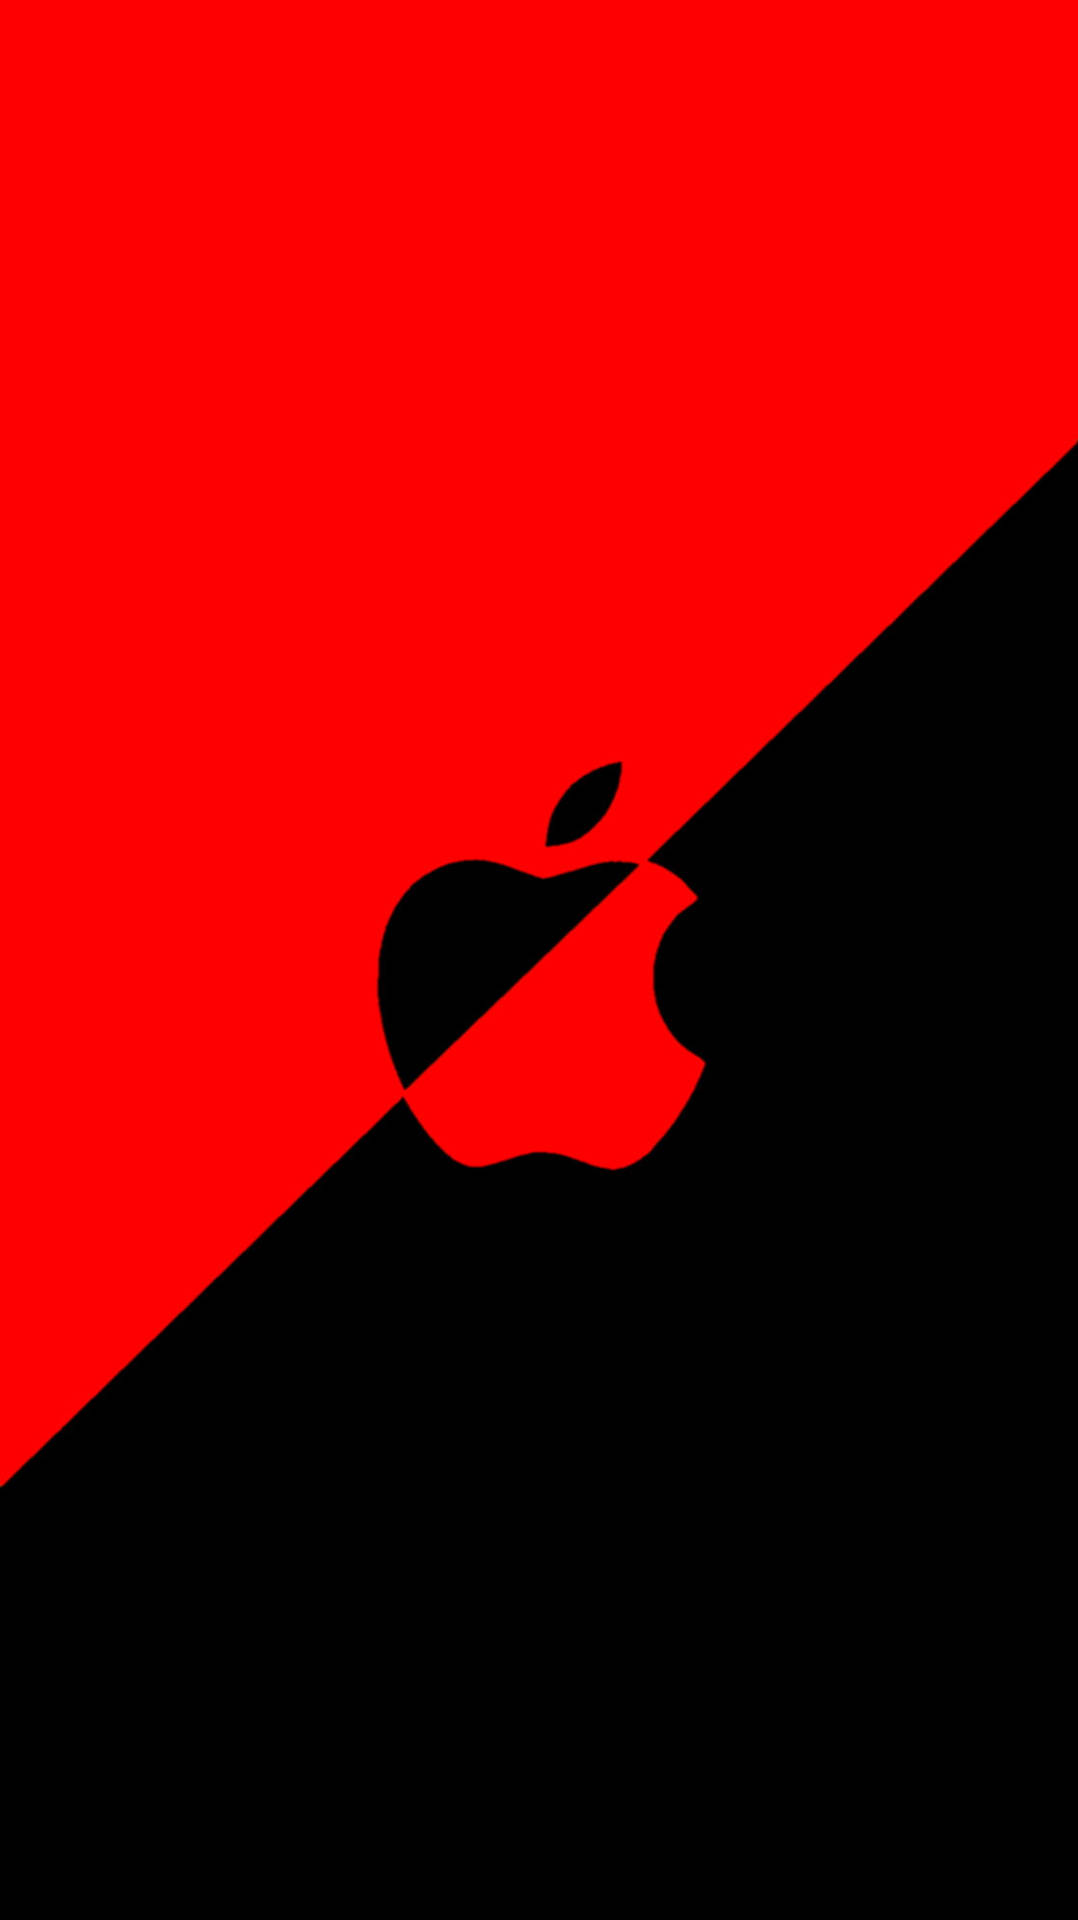 Red And Black Apple Logo Iphone Wallpaper